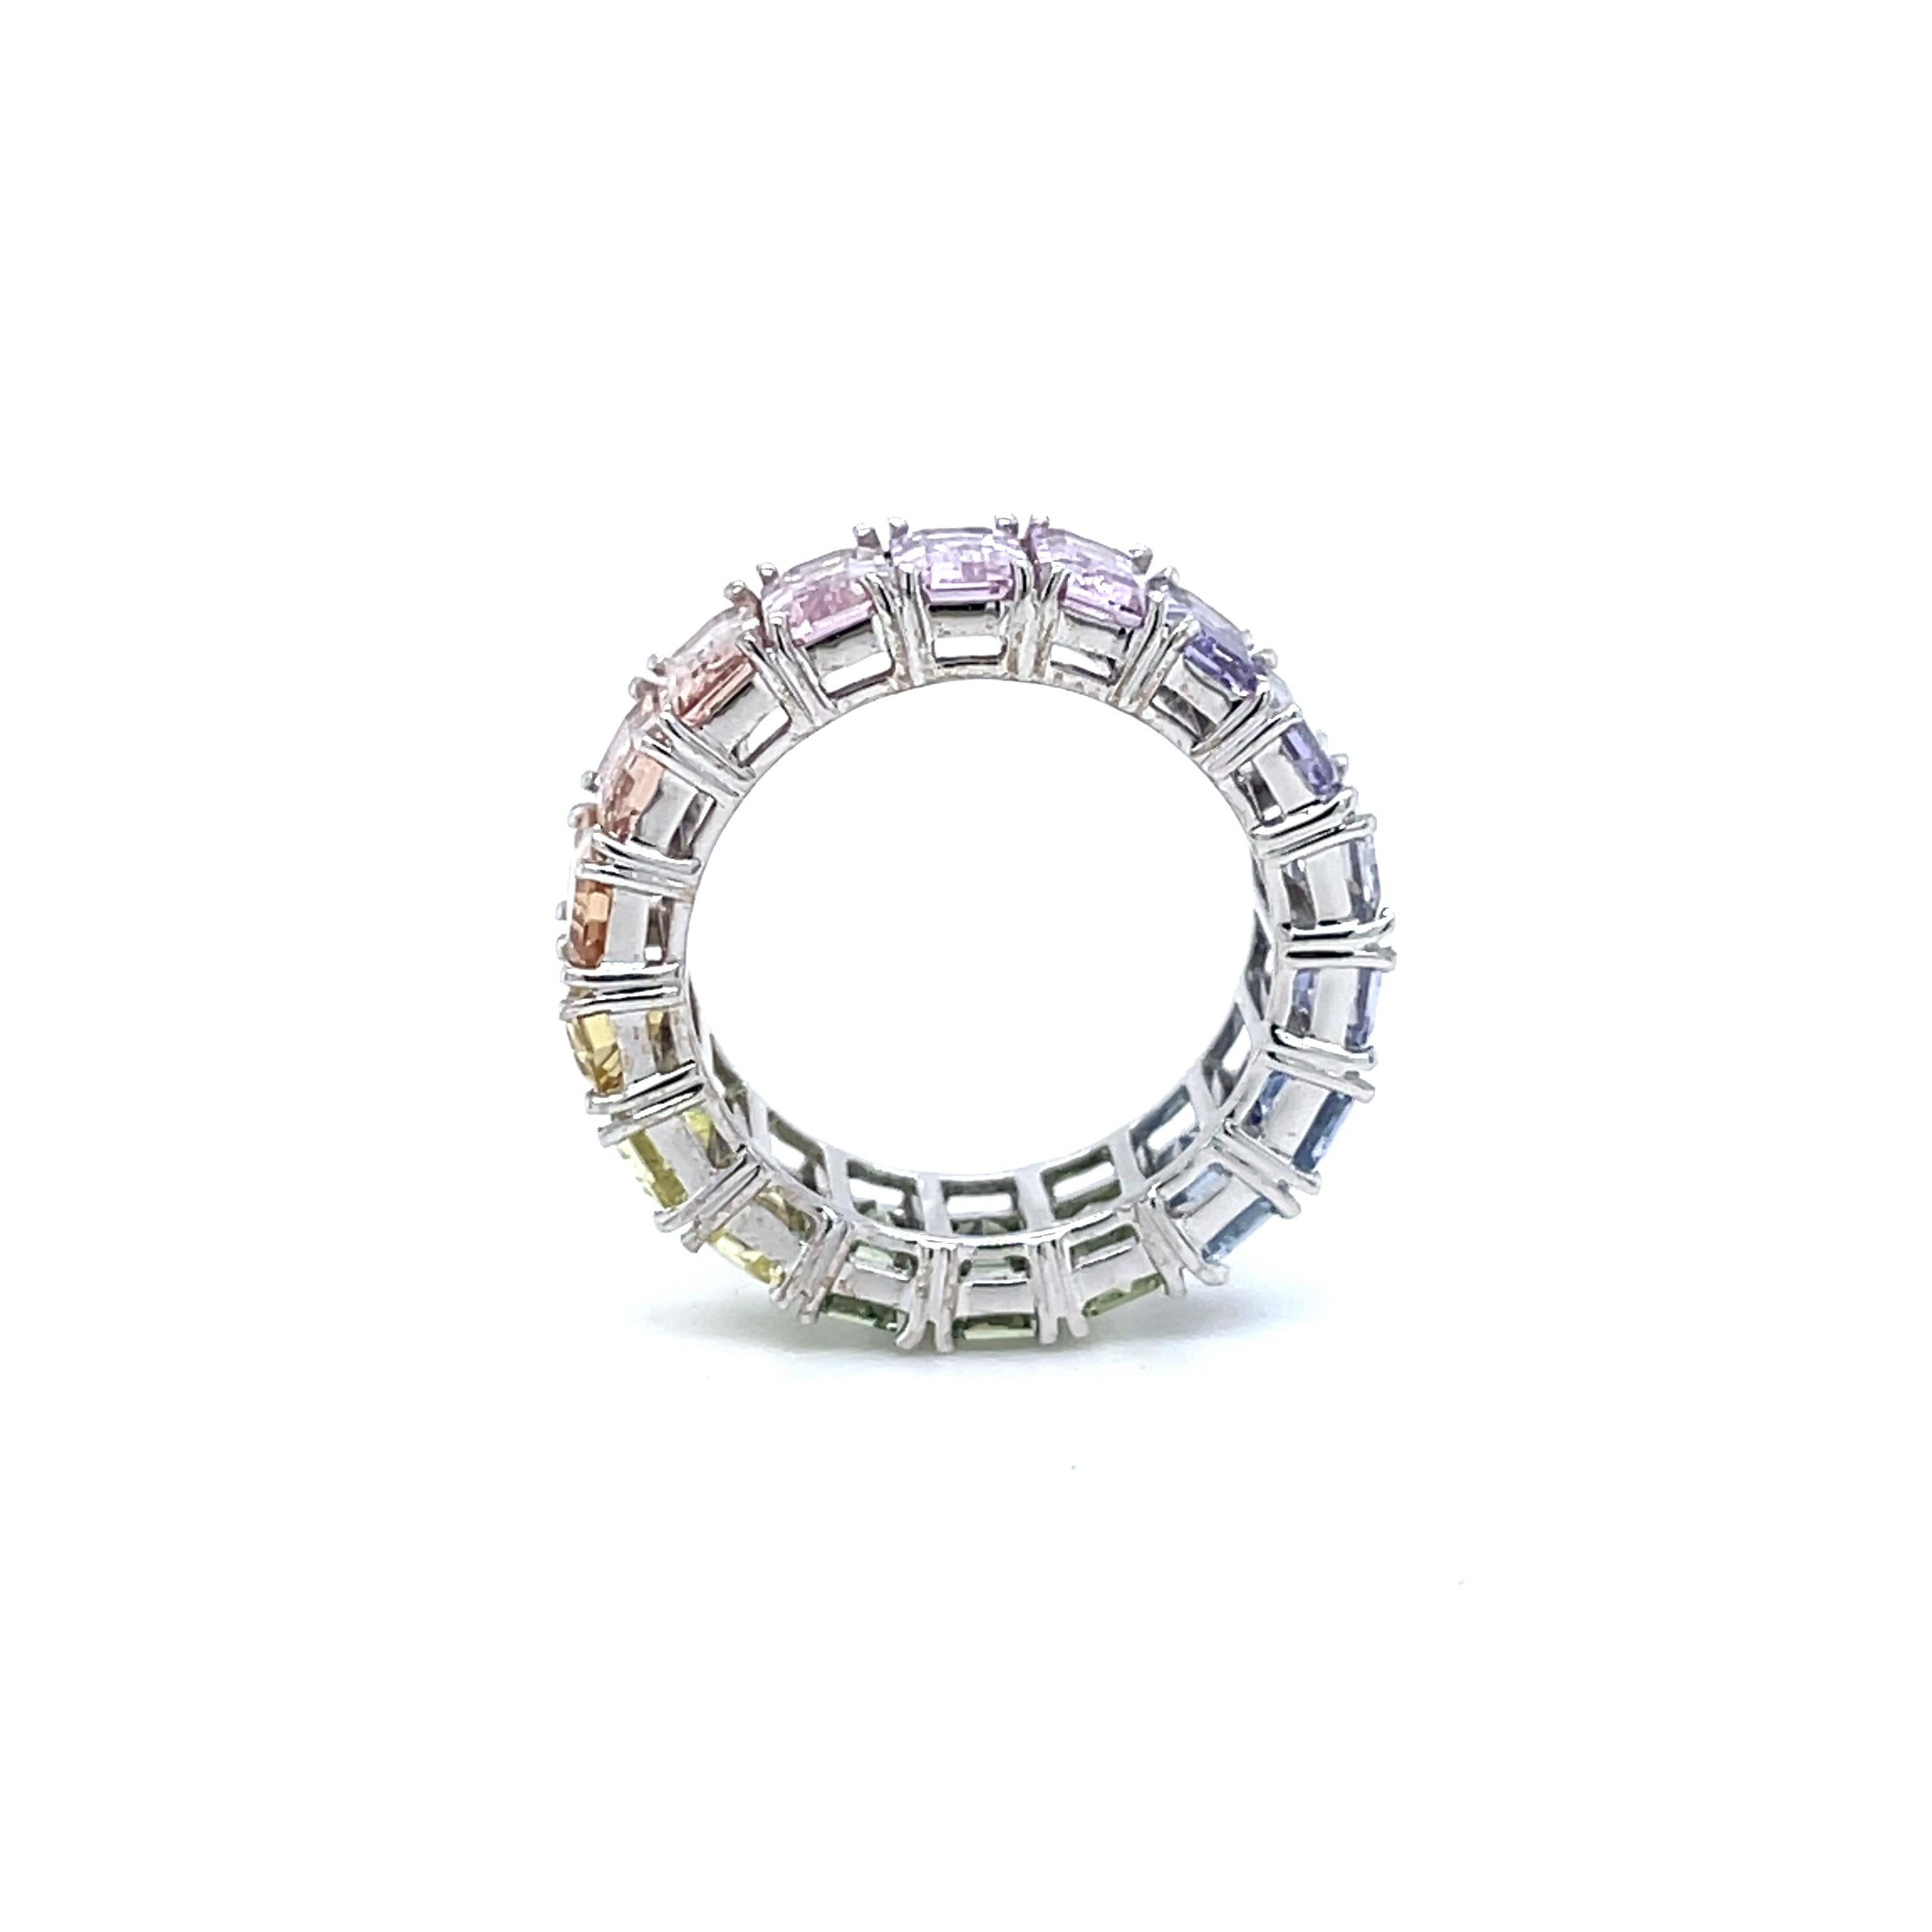 Contemporary Rainbow Unheated Sapphire Emerald Cut Eternity Ring 7.75 CTW in 18K White Gold For Sale